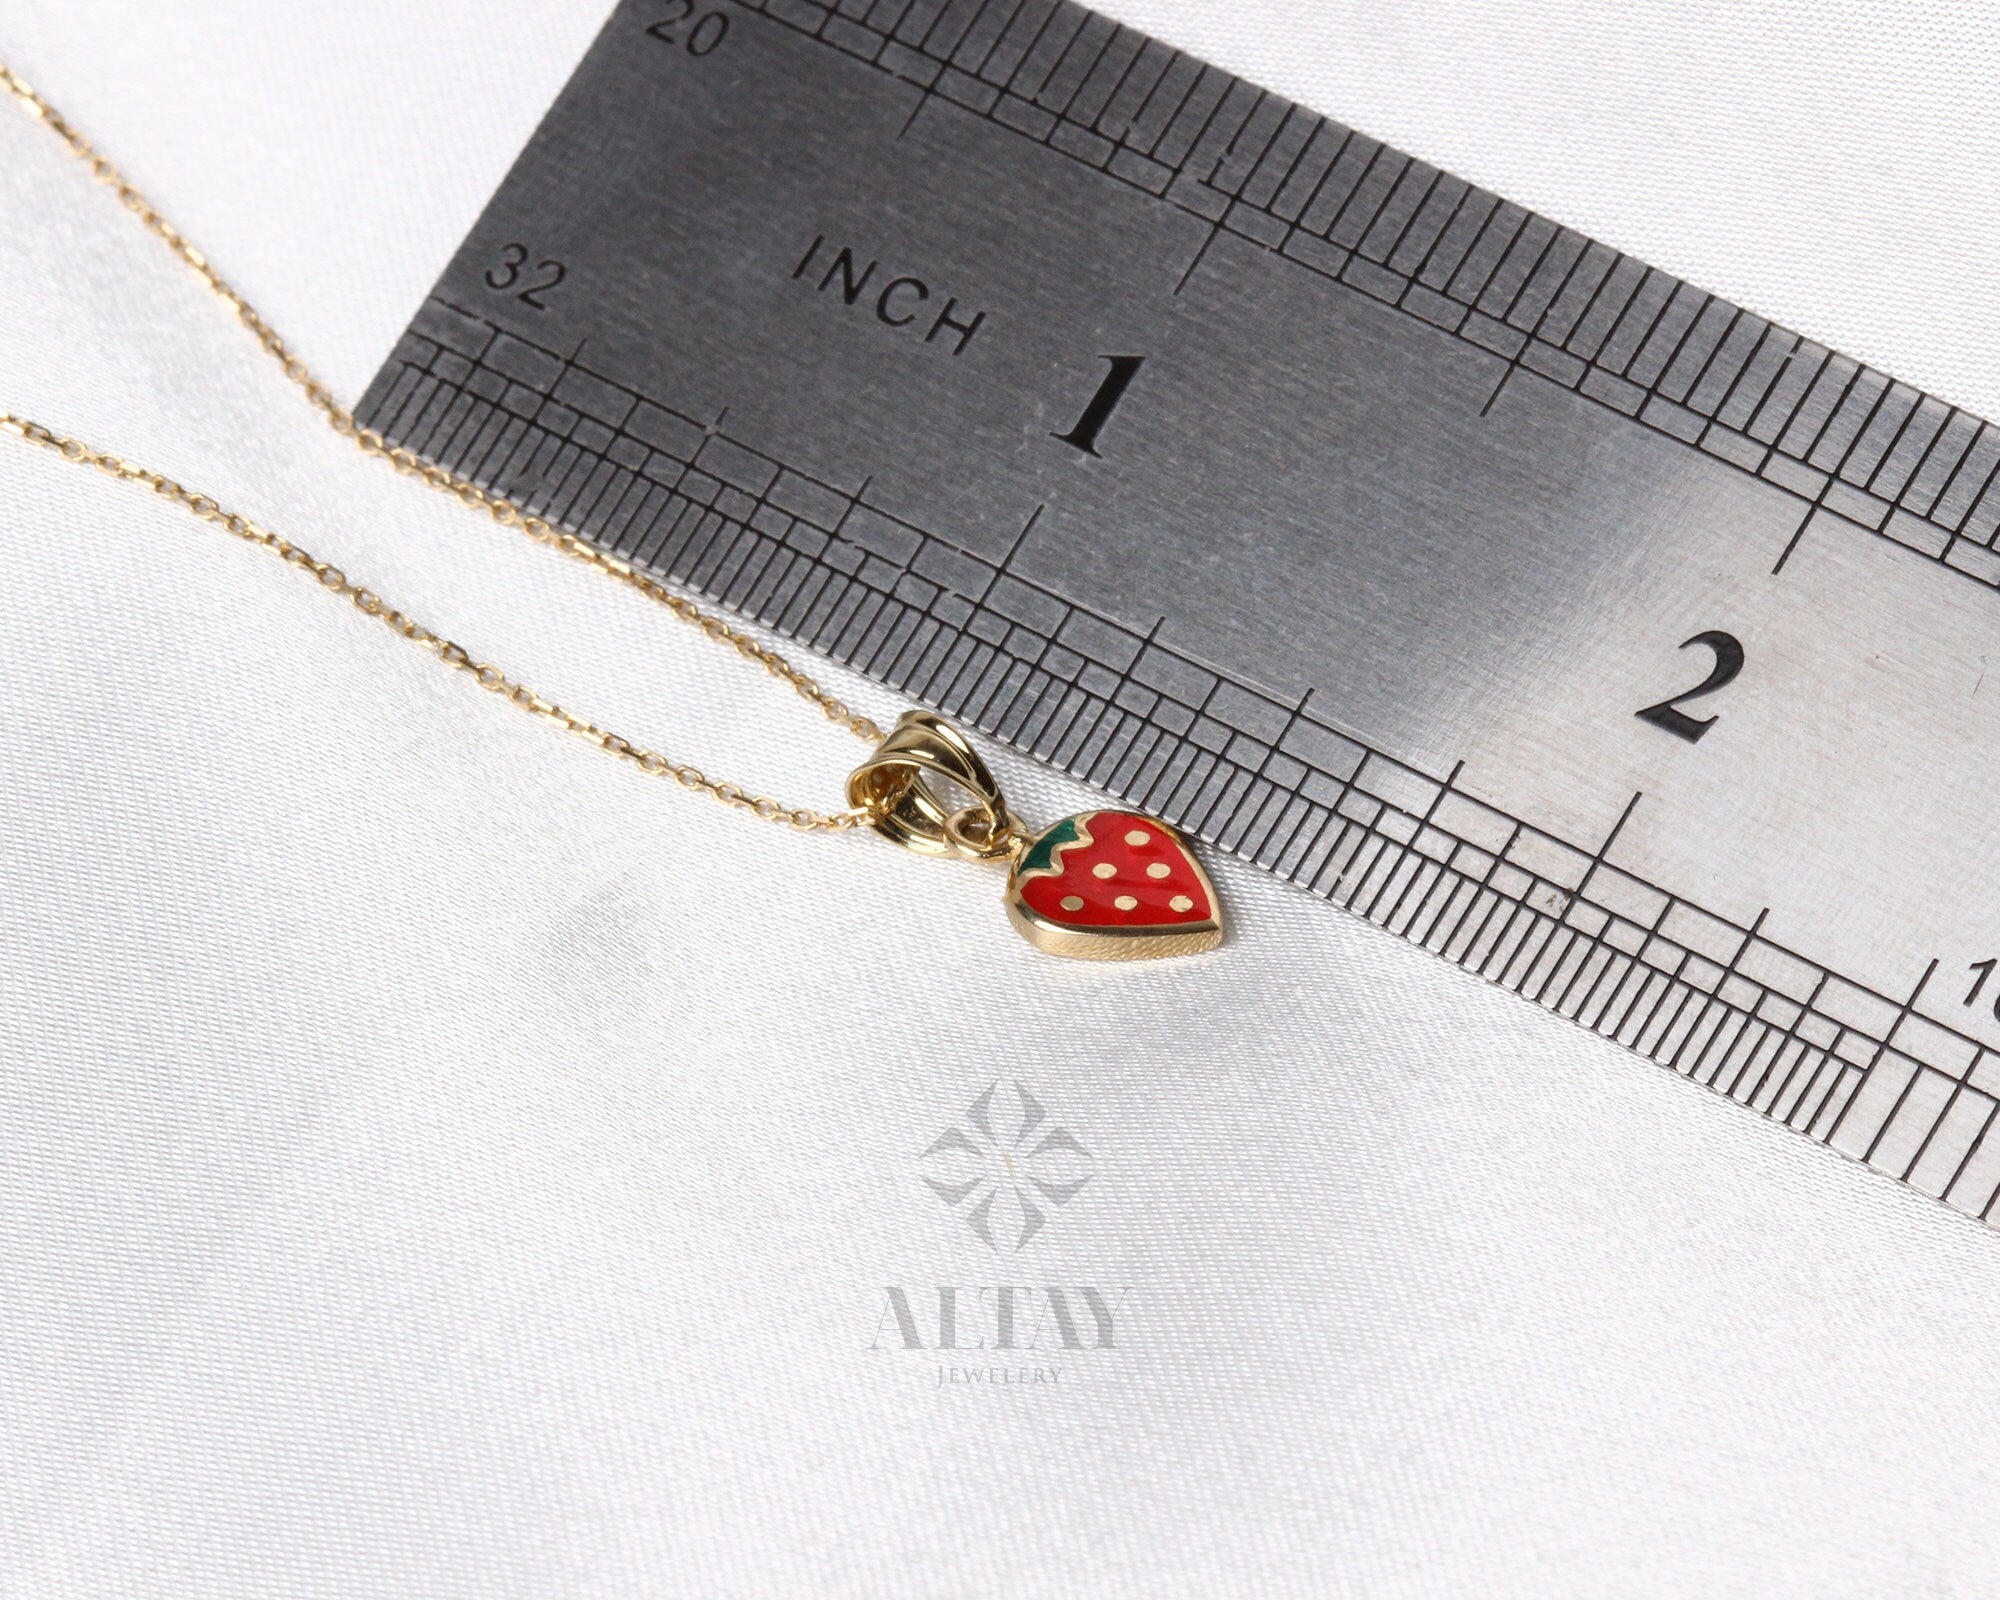 14k Gold Strawberry Necklace, Gold Fruit Necklace Pendant, Gold Cherry Charm, Tiny 14k Dainty Choker, Holiday Gift For Kids, Gift for Her